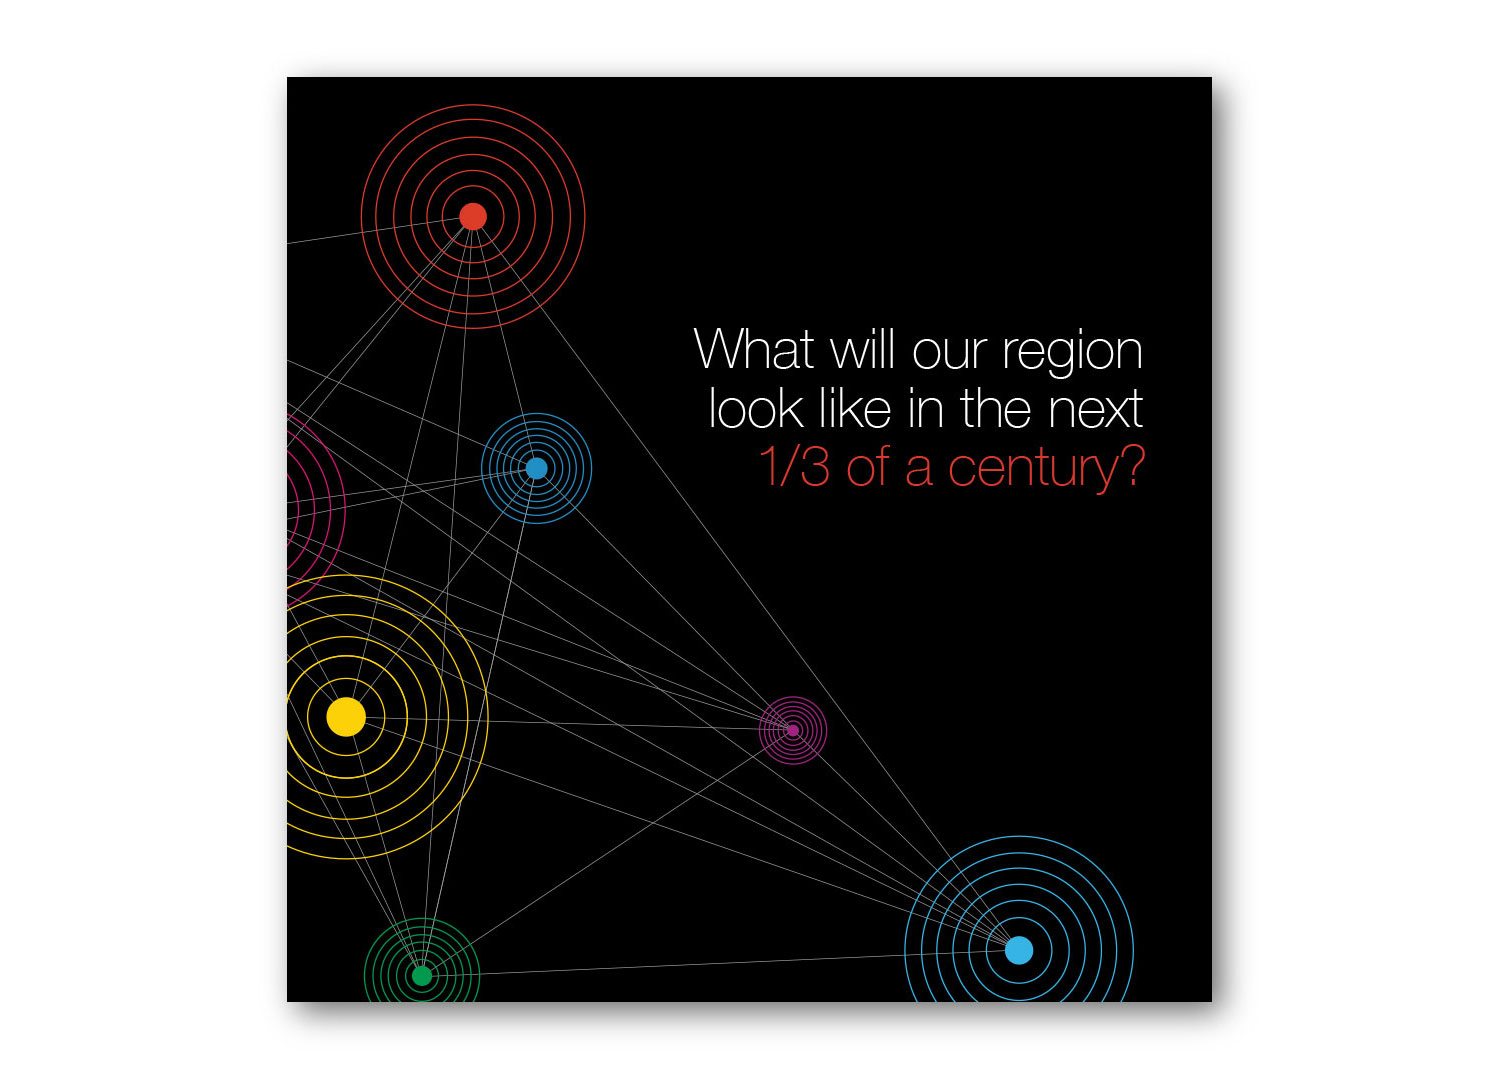 Black album cover design with text: What will our region look like in the next third of a century?